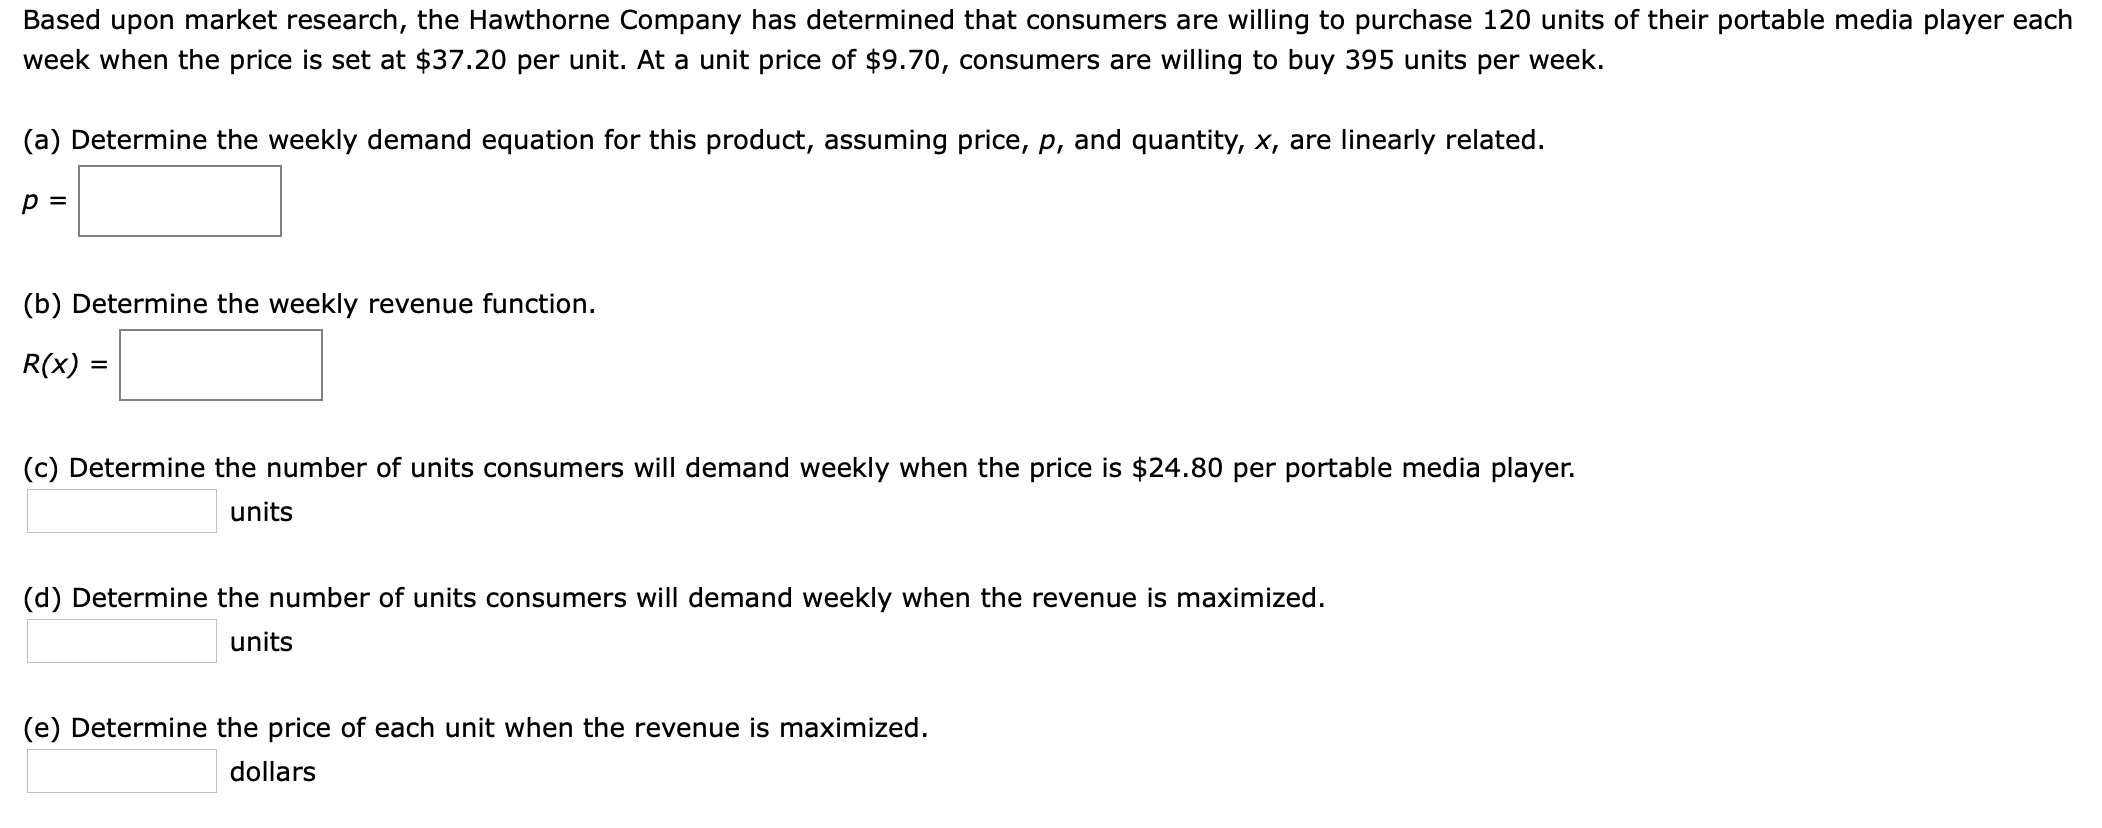 Based upon market research, the Hawthorne Company has determined that consumers are willing to purchase 120 units of their portable media player each
week when the price is set at $37.20 per unit. At a unit price of $9.70, consumers are willing to buy 395 units per week.
(a) Determine the weekly demand equation for this product, assuming price, p, and quantity, x, are linearly related
р3
(b) Determine the weekly revenue function
R(x) =
(c) Determine the number of units consumers will demand weekly when the price is $24.80 per portable media player.
units
(d) Determine the number of units consumers will demand weekly when the revenue is maximized
units
(e) Determine the price of each unit when the revenue is maximized.
dollars
